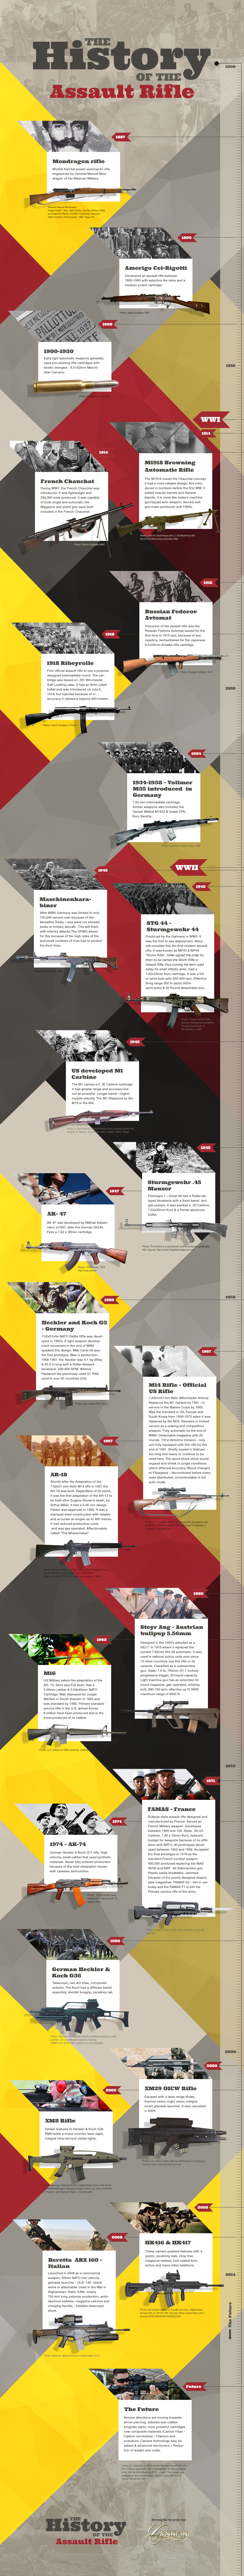 The History of the Assault Rifle